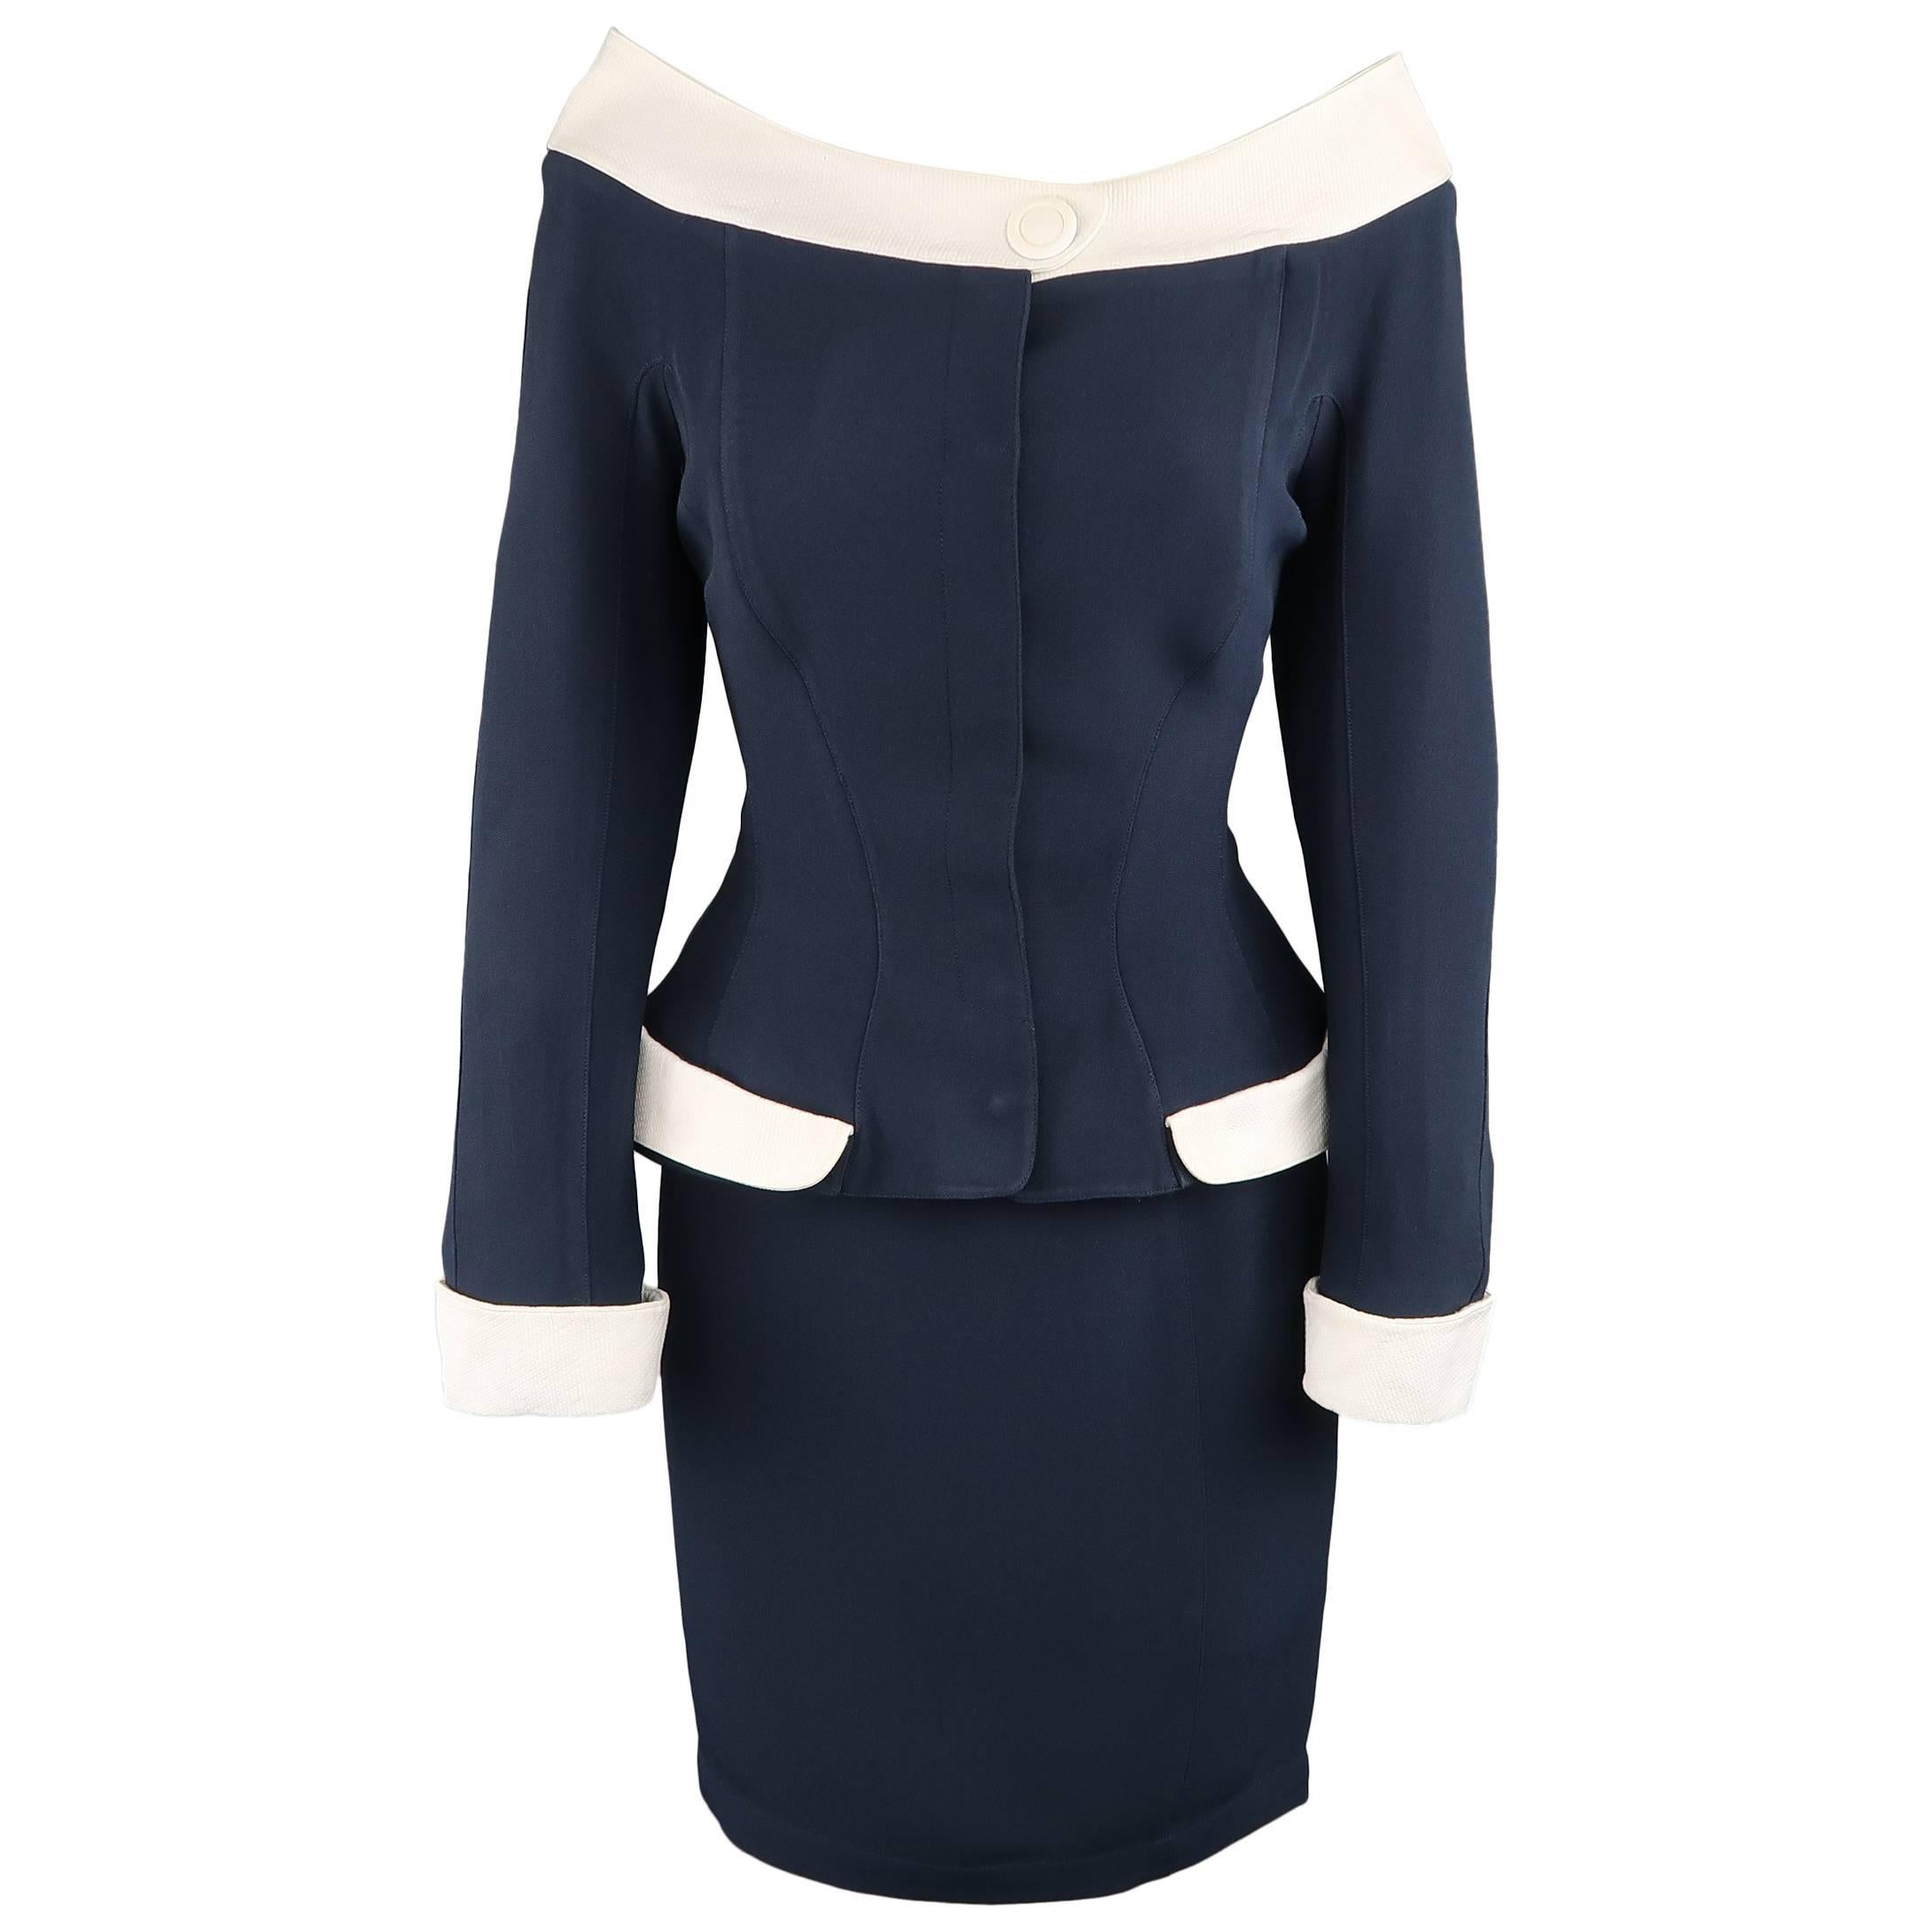 THIERRY MUGLER Size 10 Navy & White Off The Shoulder Portrait Collar Skirt Suit